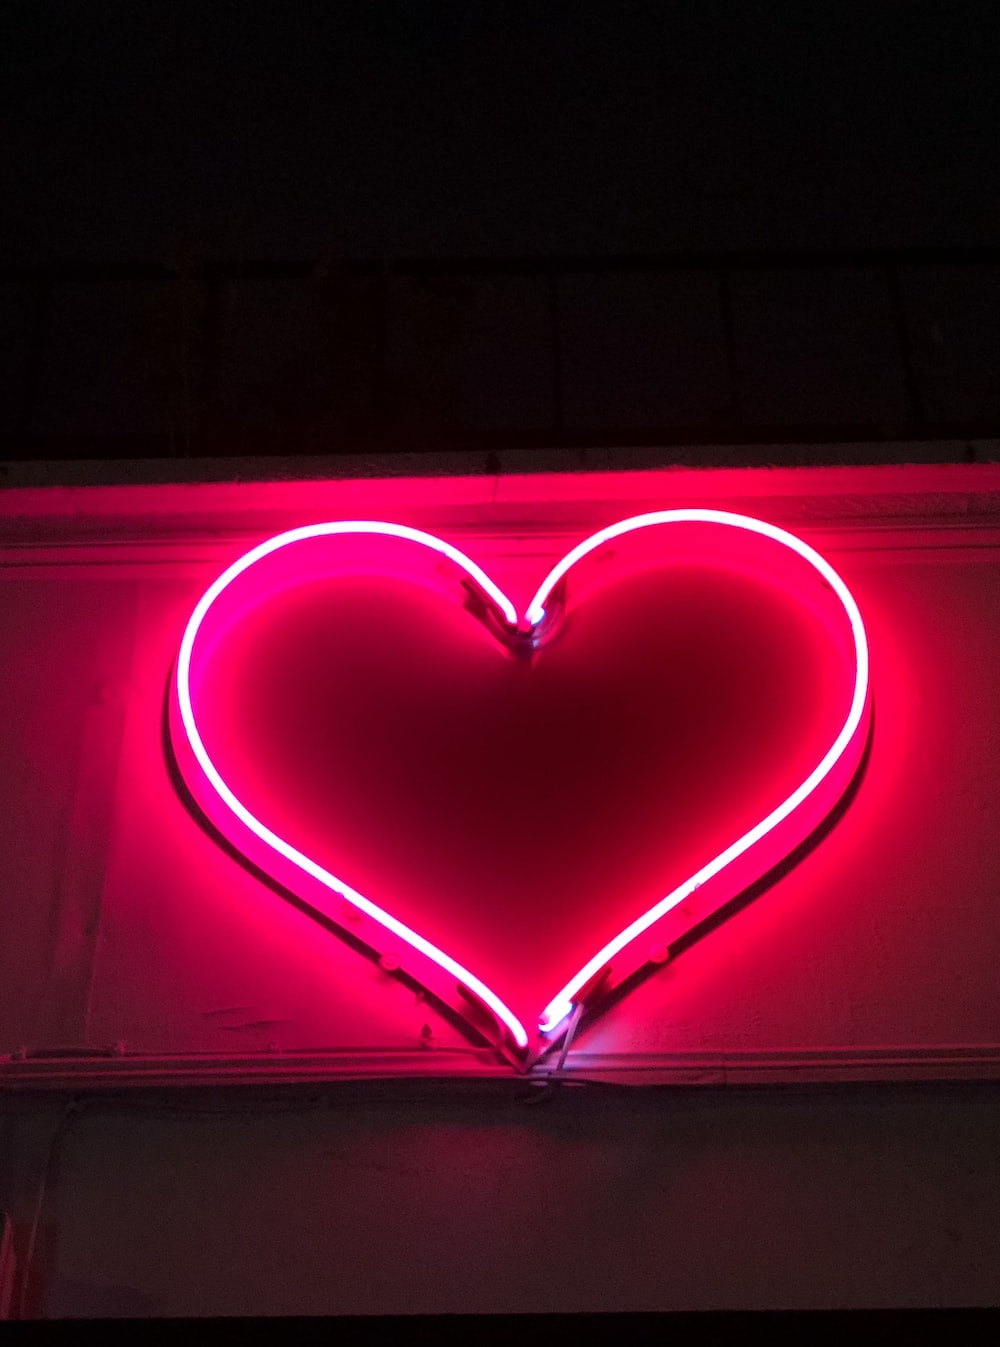 1K+ Neon Heart Picture. Download Free Image